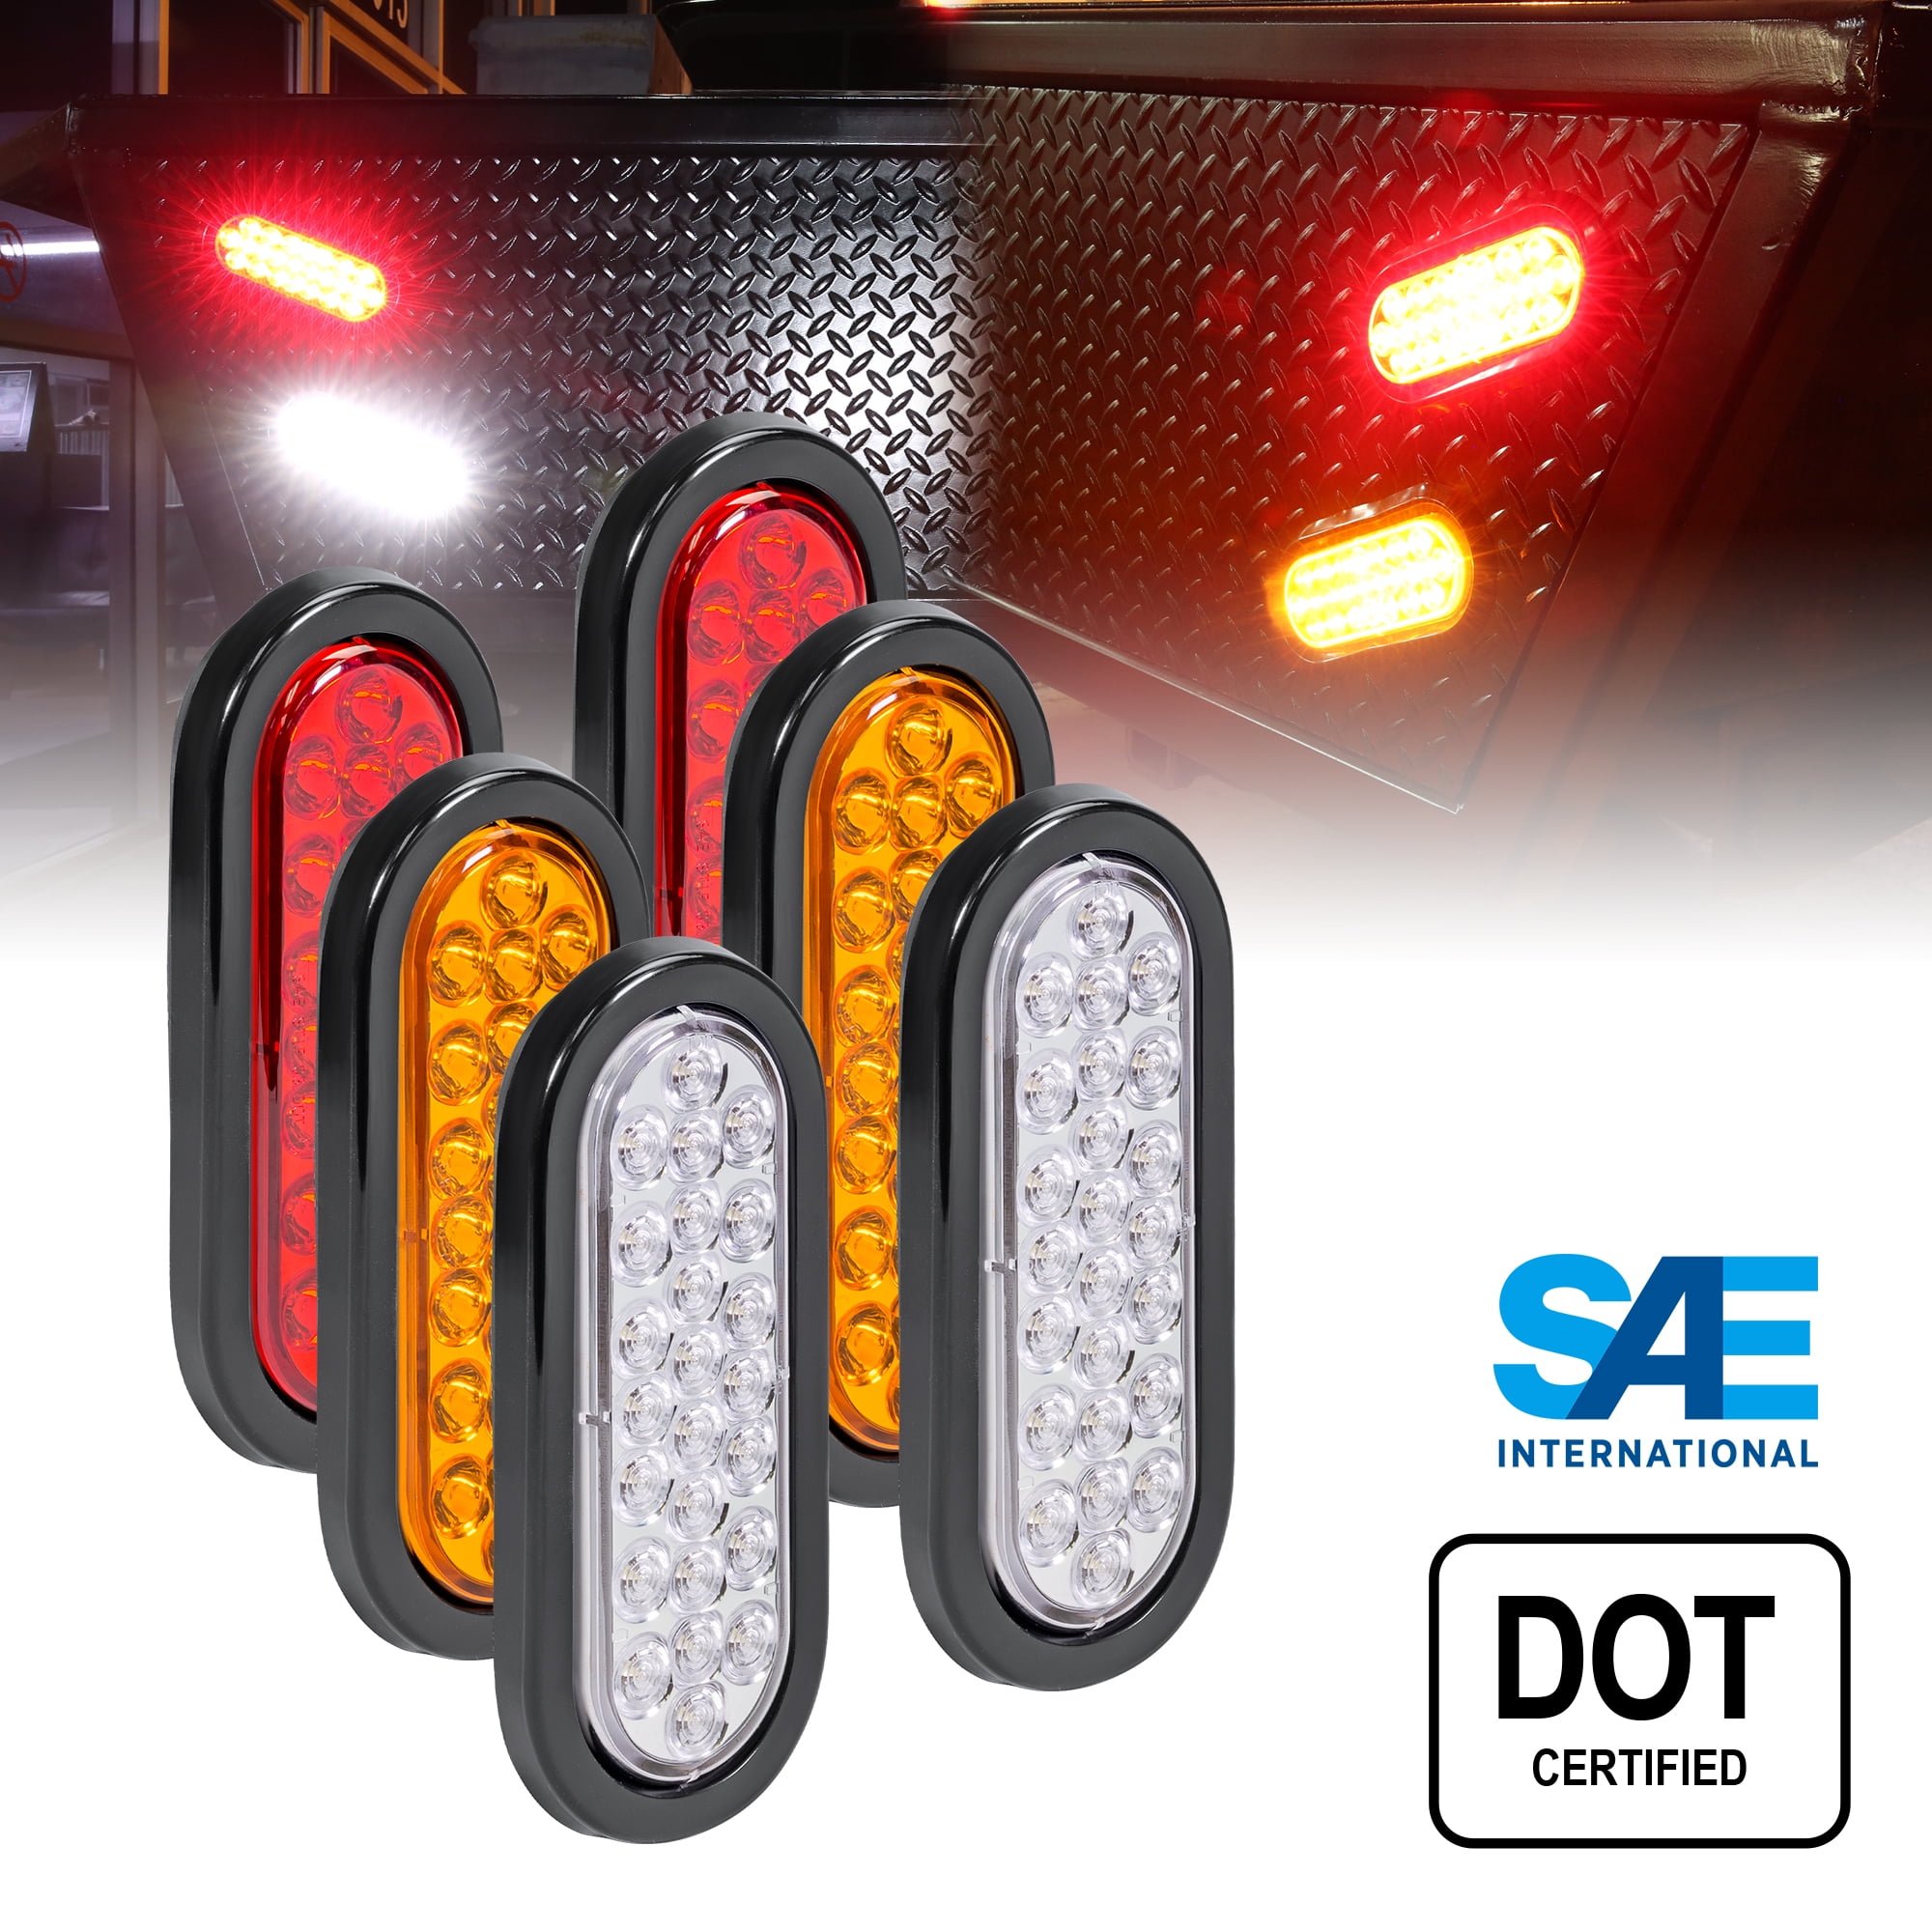 LED Truck Trailer Light Kit Double Face 4pcs 3 Round 24 LED Amber White Red Light Stop Turn Tail Lights Compatible with Kenworth Freightliner Peterbilt